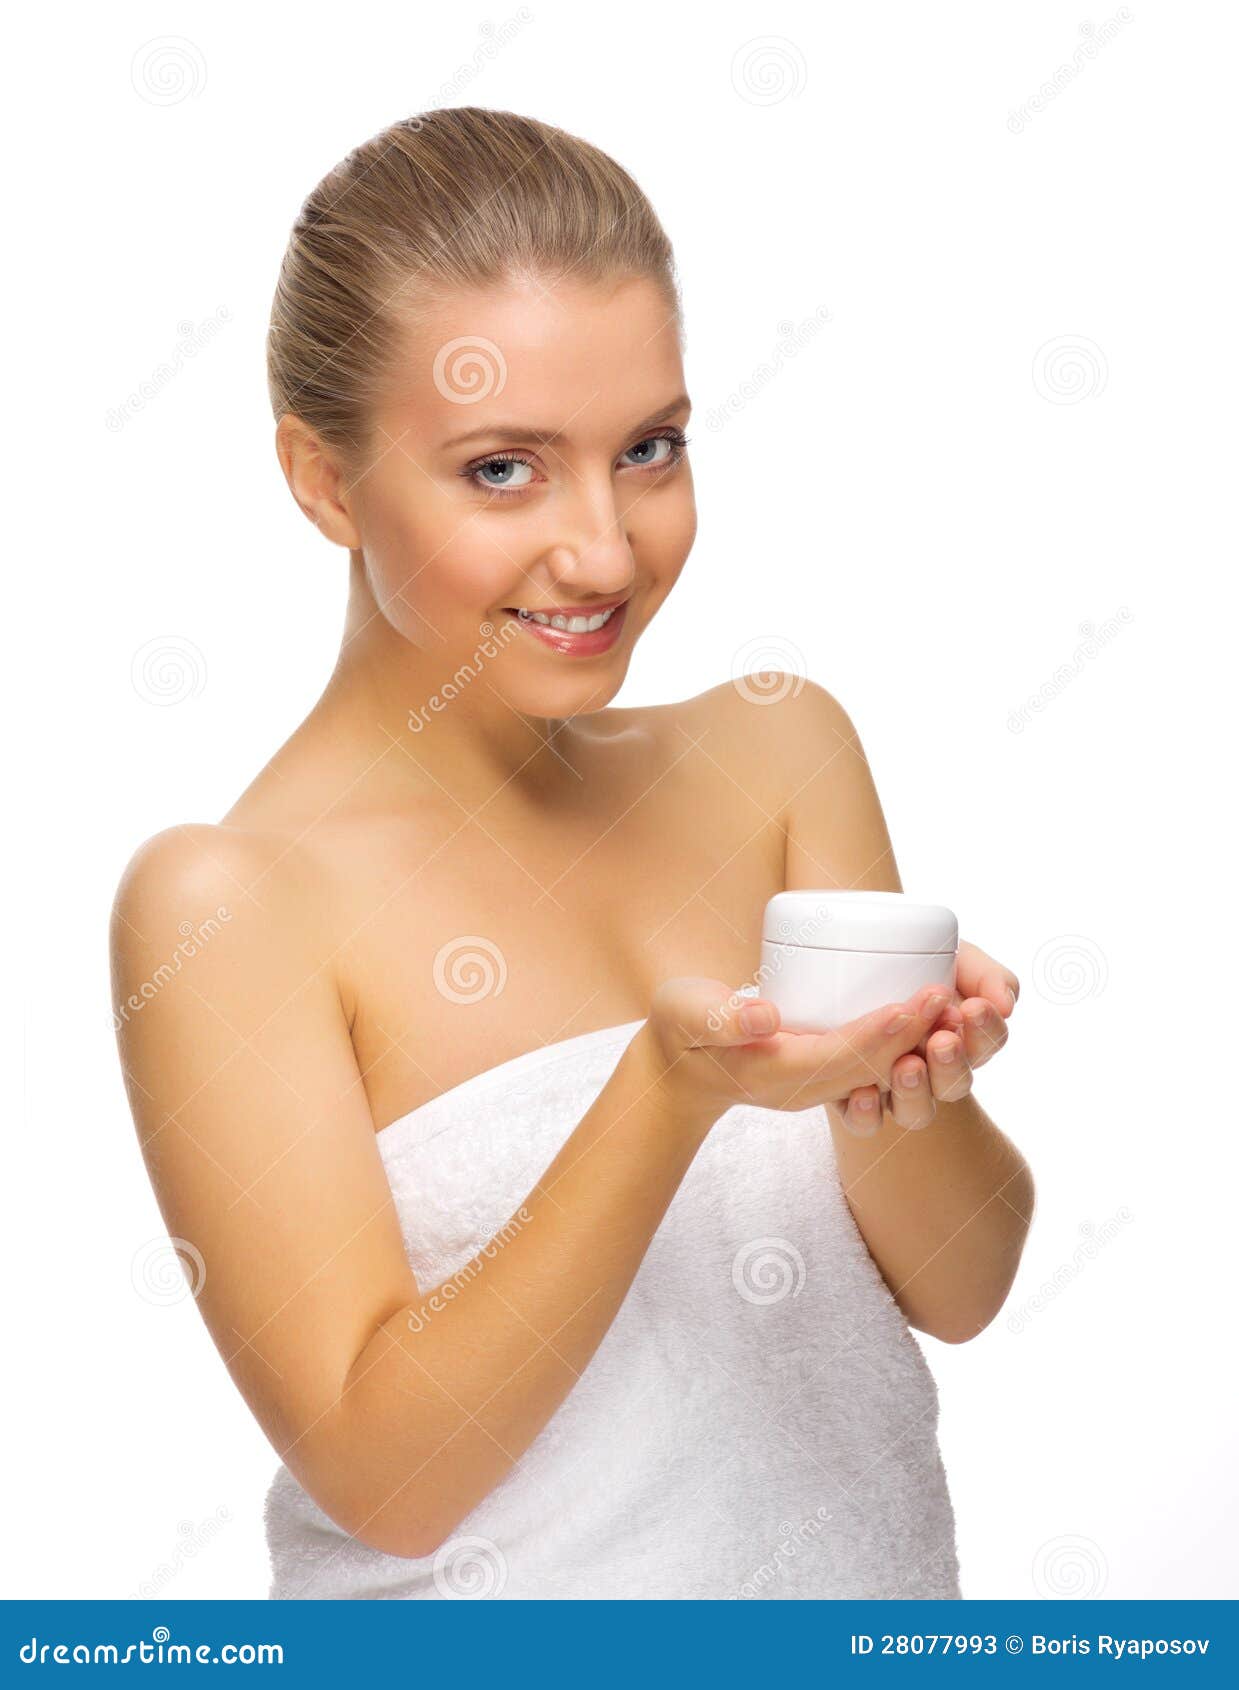 young-healthy-woman-body-cream-isolated-28077993.jpg